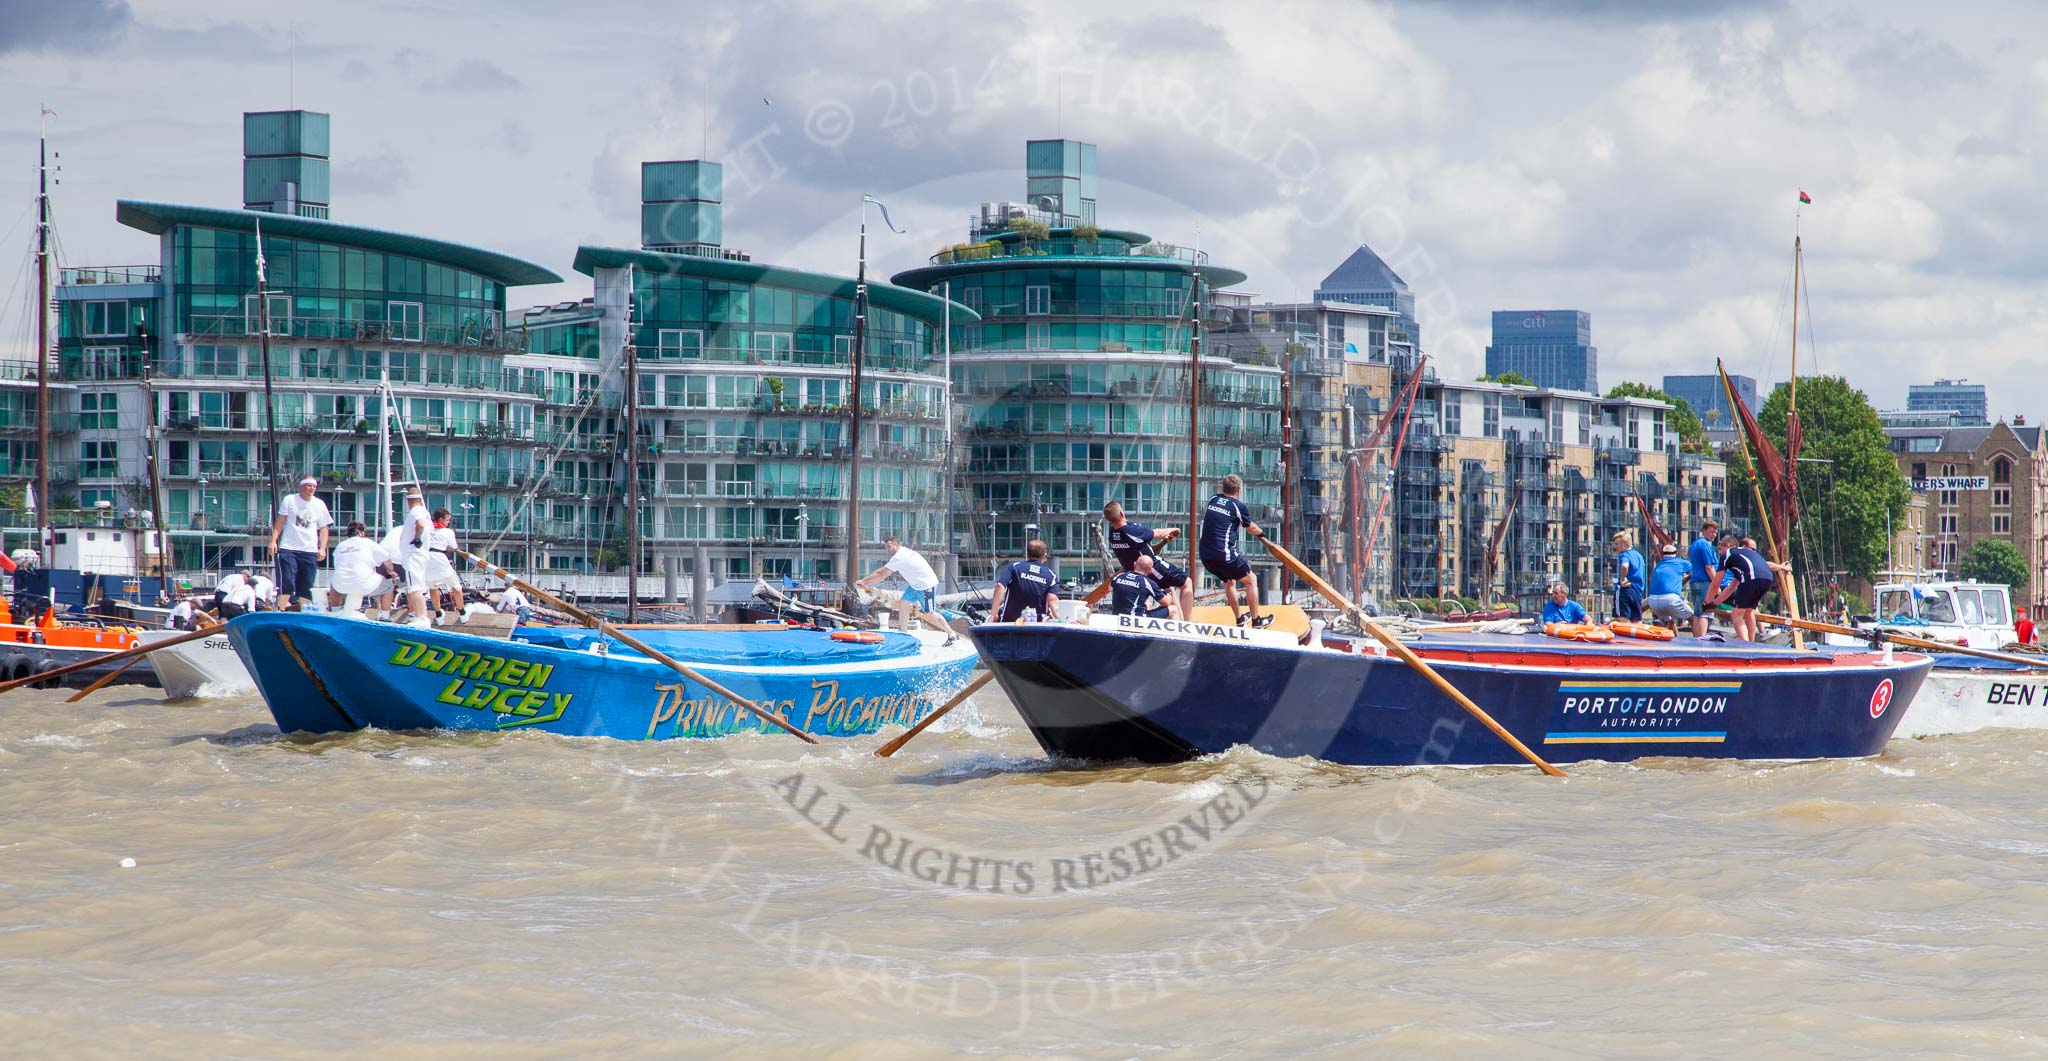 TOW River Thames Barge Driving Race 2014.
River Thames between Greenwich and Westminster,
London,

United Kingdom,
on 28 June 2014 at 13:29, image #243